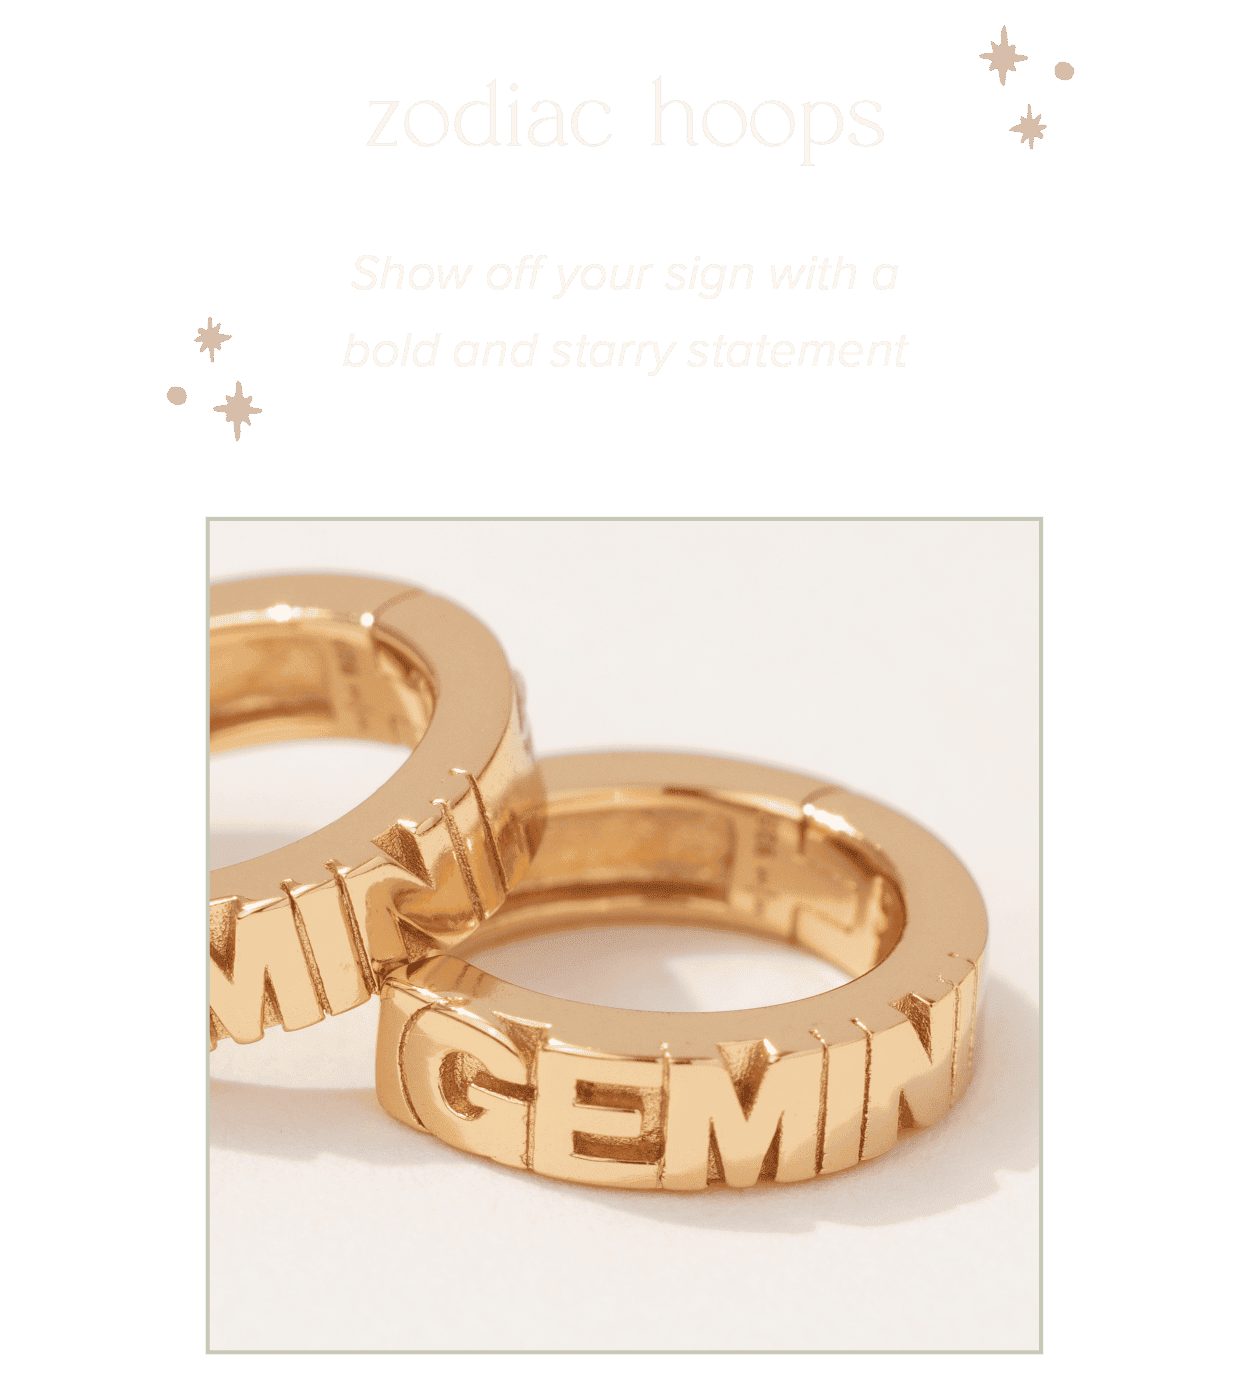 Zodiac Hoops Show off your sign with a bold and starry statement